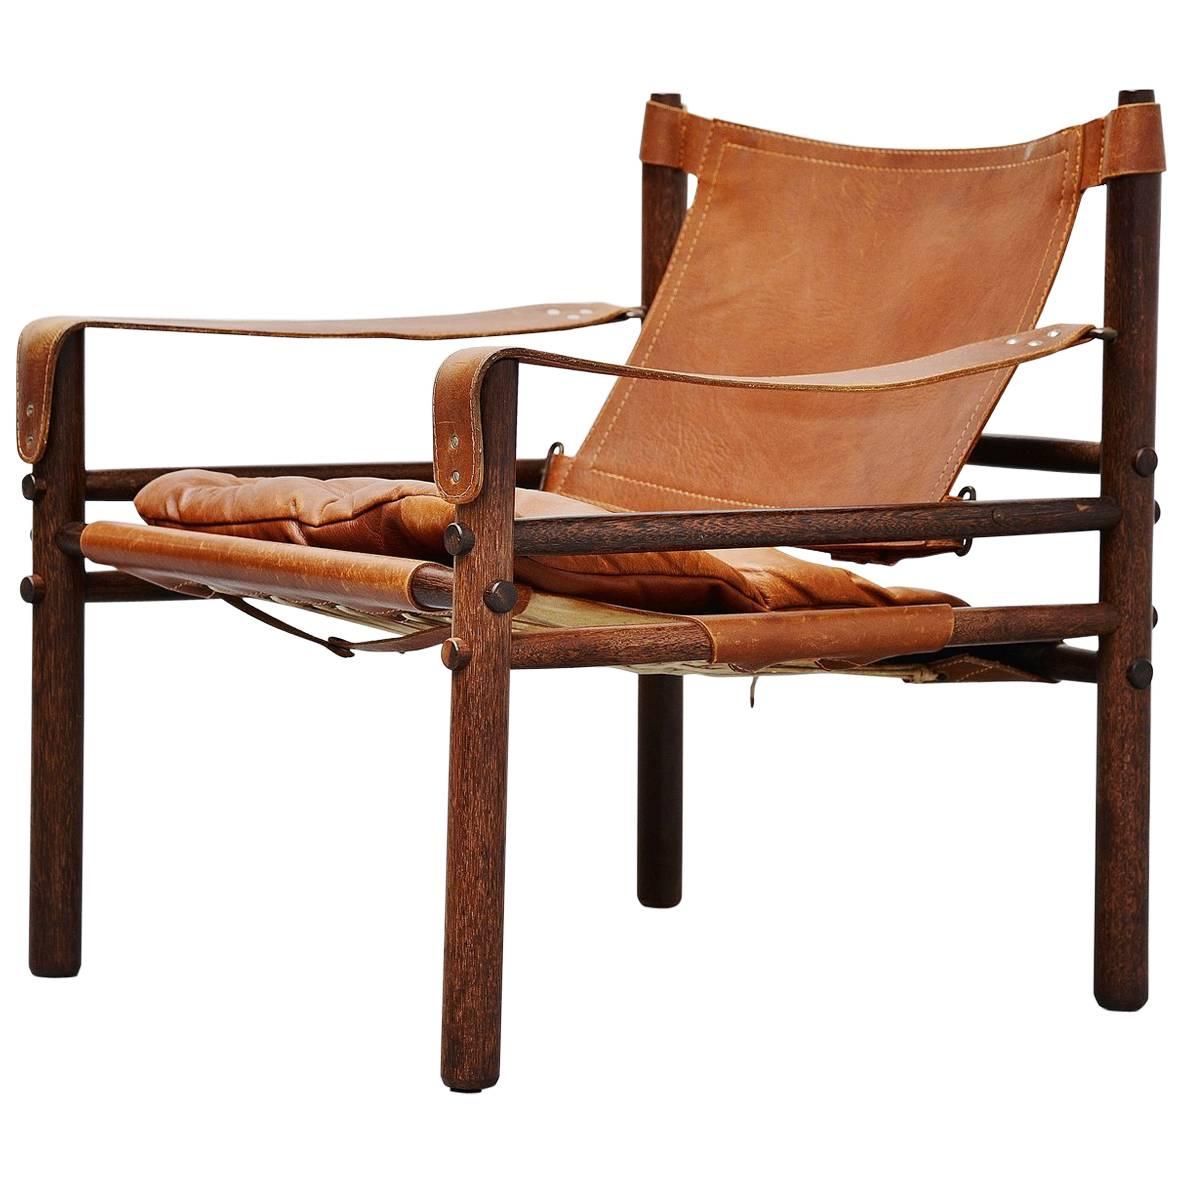 Arne Norell Sirocco Chair in Cognac Leather, Sweden, 1964